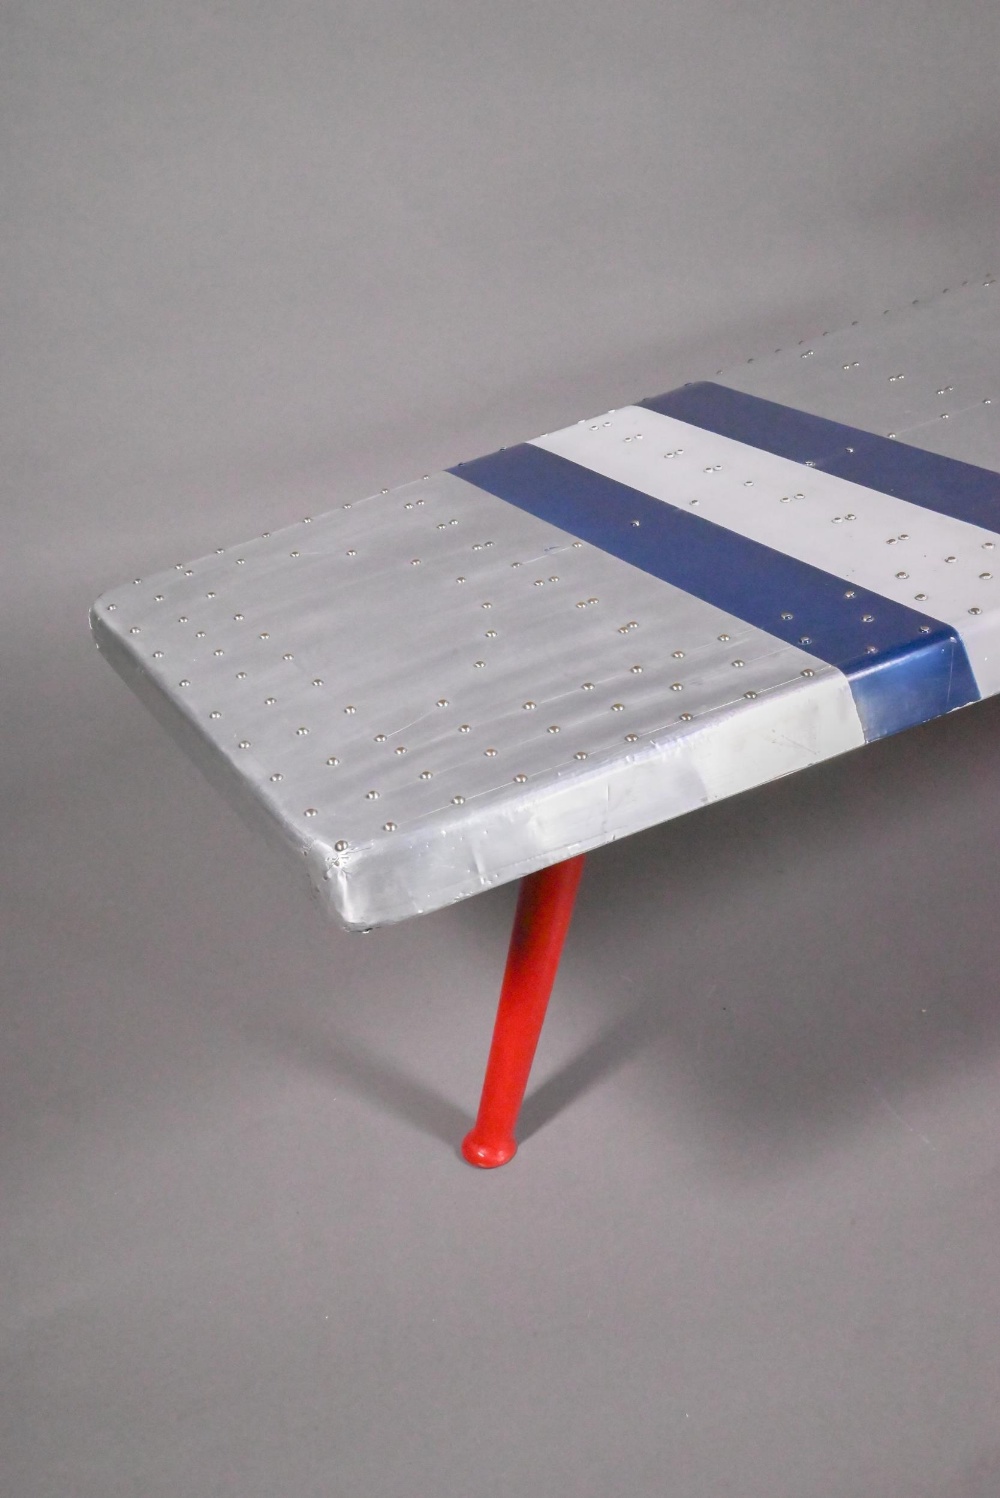 A rivetted vintage alloy aeroplane wing style tripod coffee table - Image 2 of 7